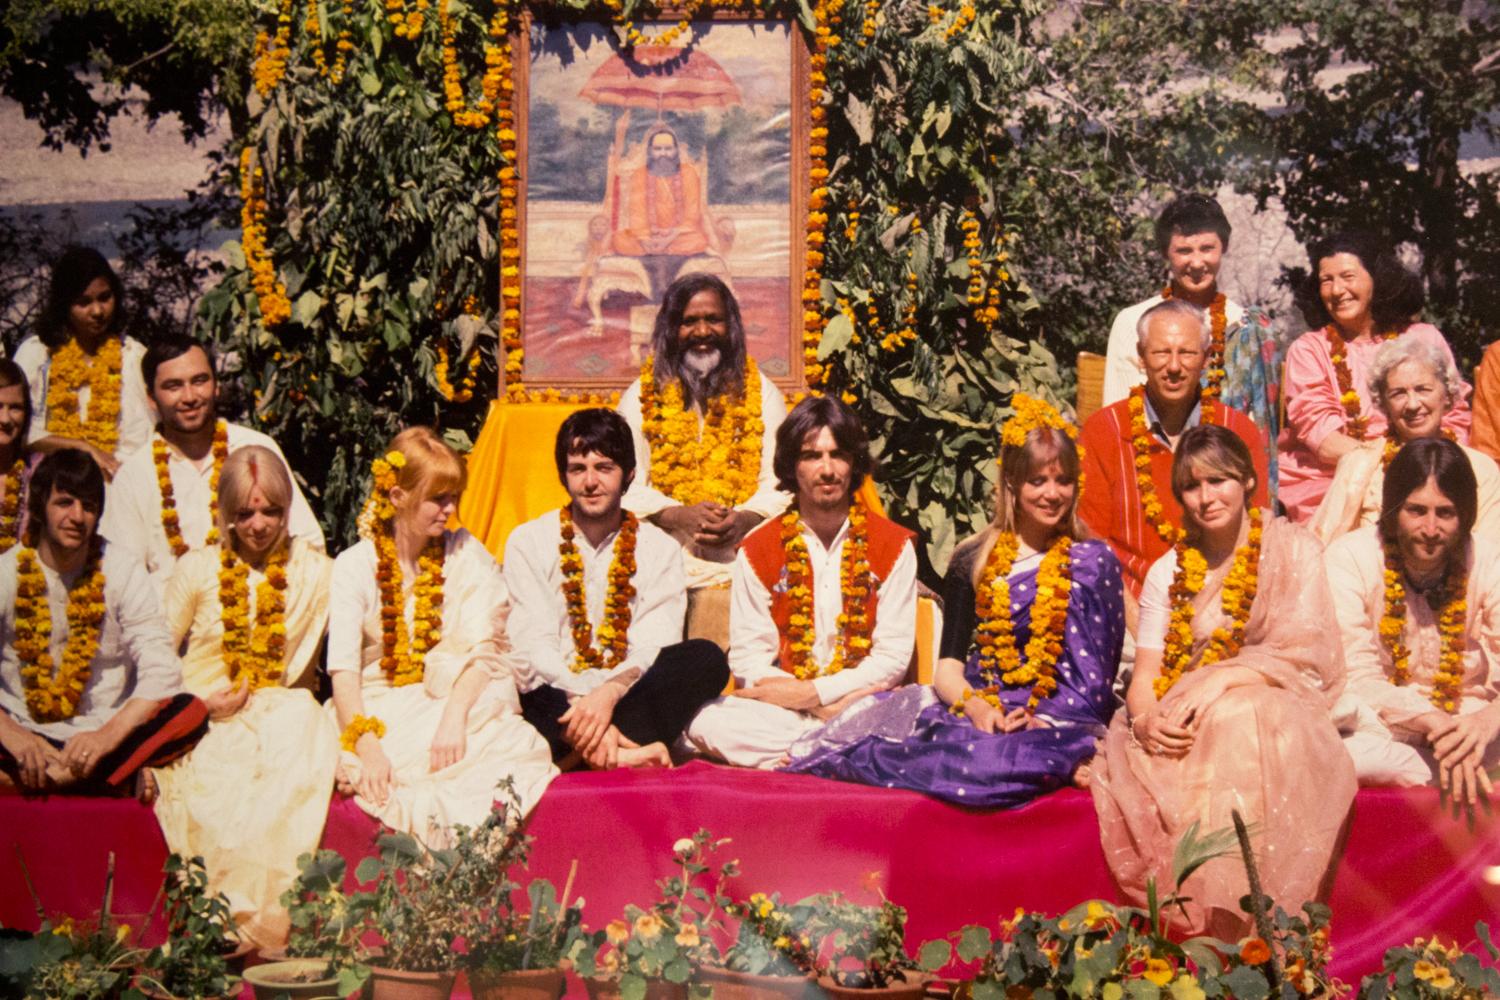 In 1968 photographer Paul Saltzman traveled to India on an assignment, and then went to meditate with Maharishi Mahesh Yogi at his ashram in the holy city of Rishikesh. Fortunately for him, The Beatles were all at the ashram, and he was able to meet